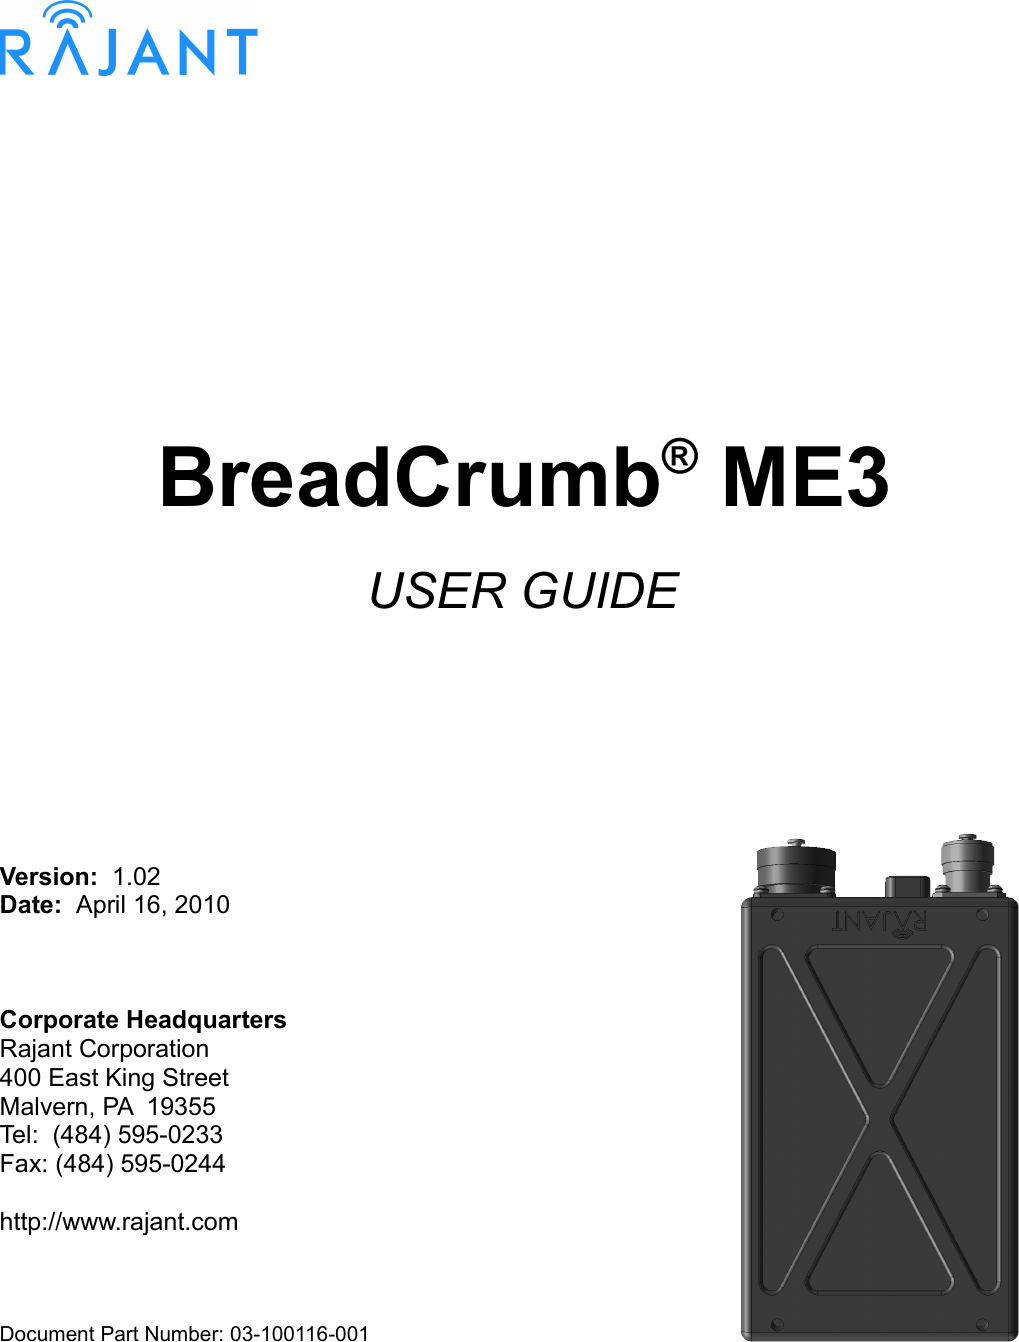 9BreadCrumb® ME3USER GUIDEVersion:  1.02Date:  April 16, 2010Corporate HeadquartersRajant Corporation400 East King StreetMalvern, PA  19355Tel:  (484) 595-0233Fax: (484) 595-0244http://www.rajant.comDocument Part Number: 03-100116-001